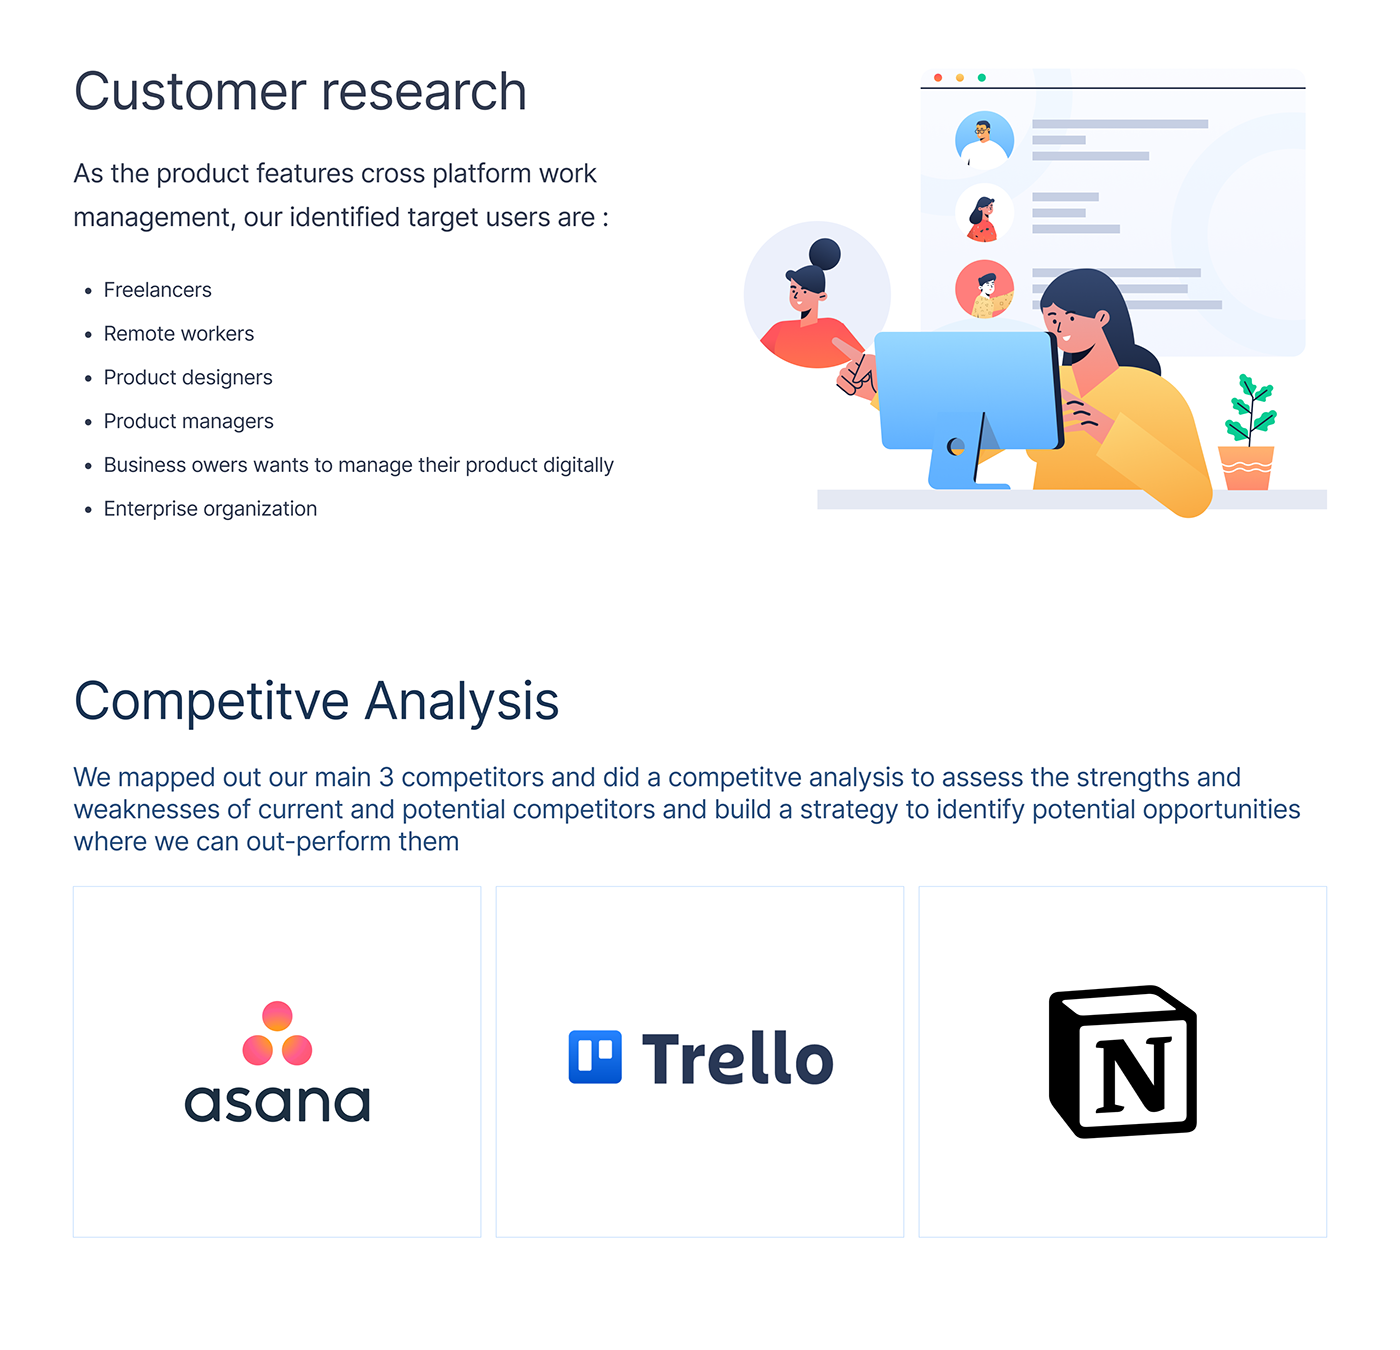 customer research and competitive analysis